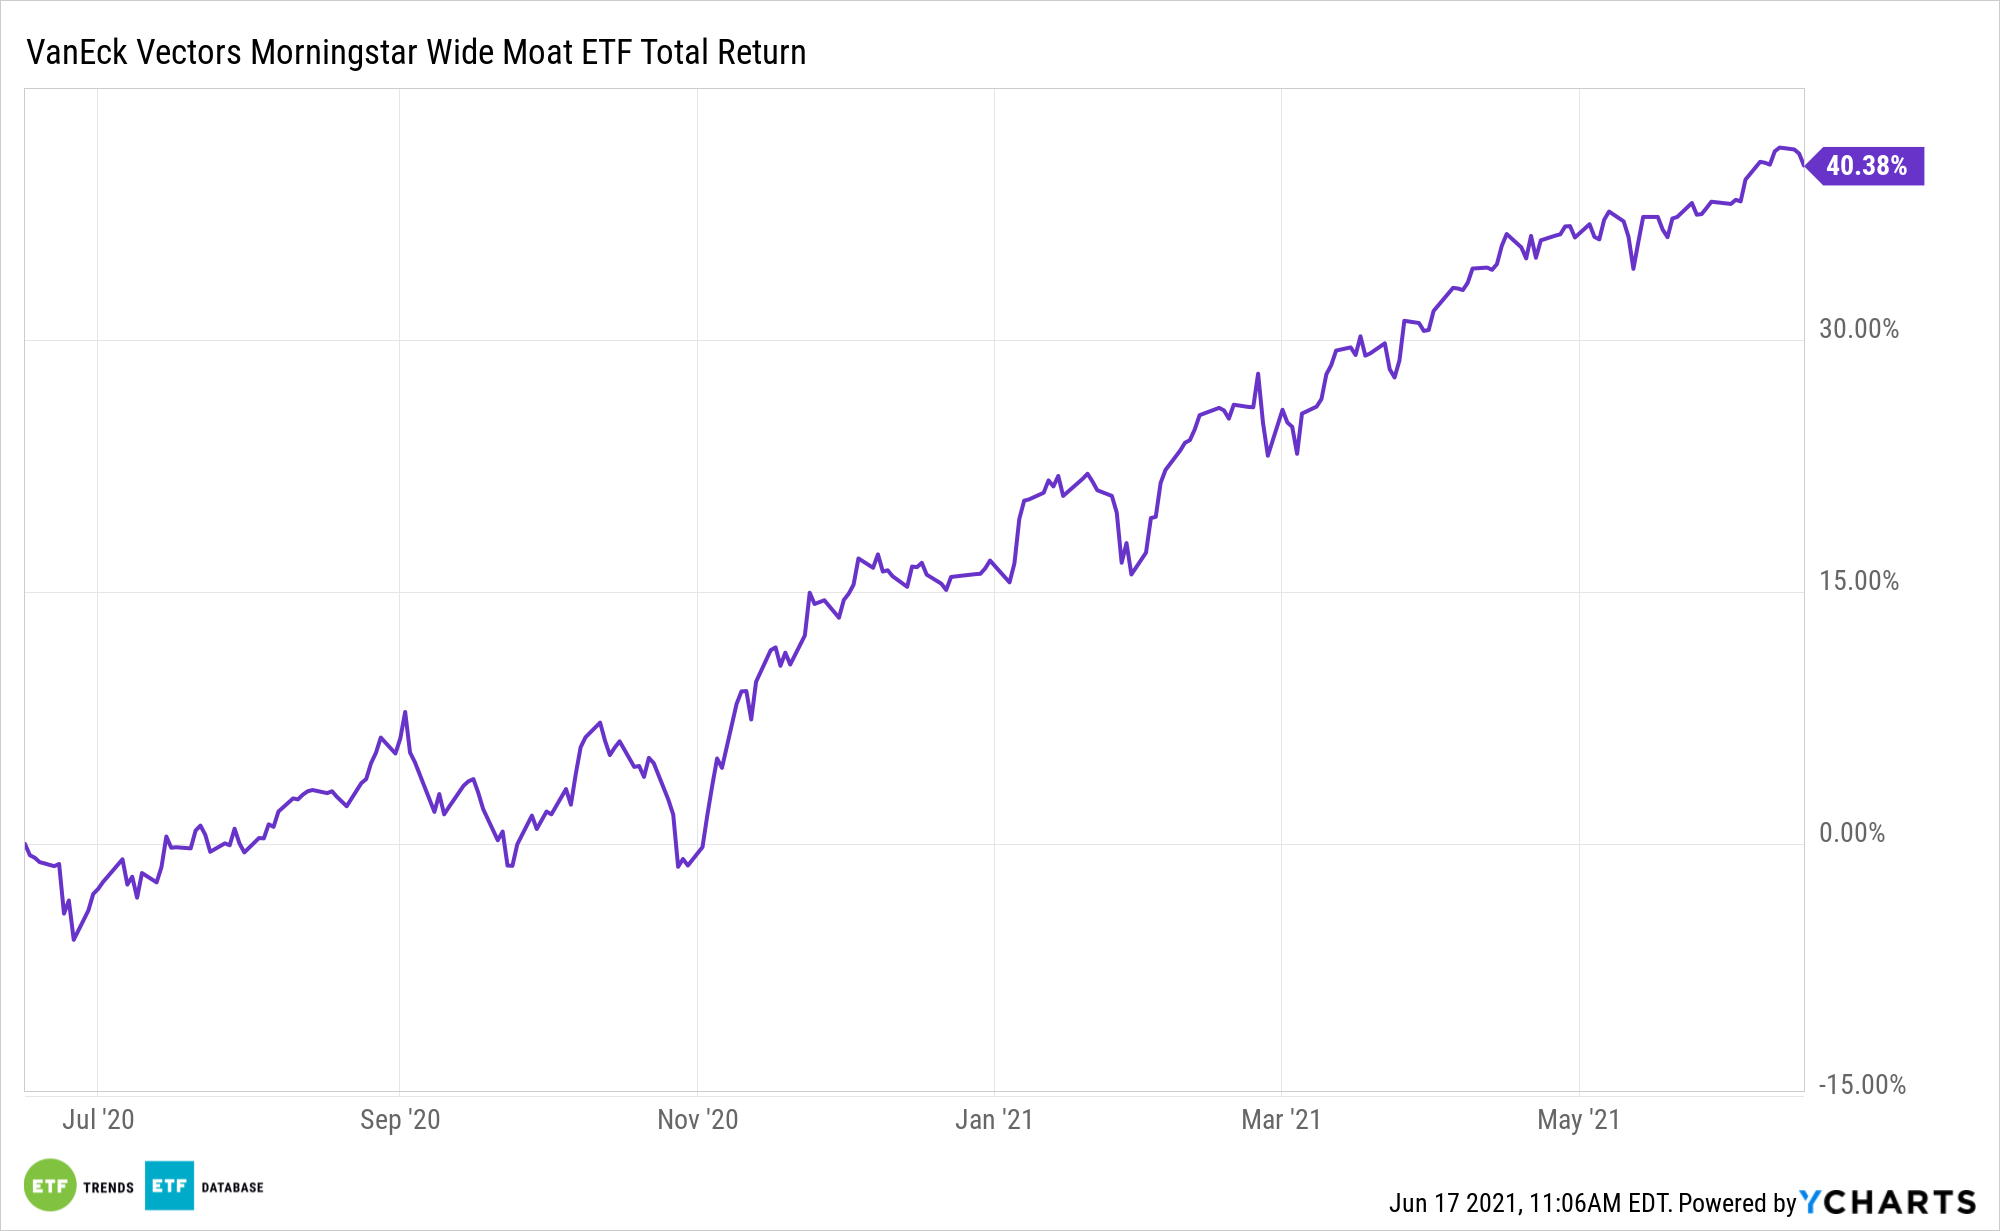 MOAT 1 Year Performance